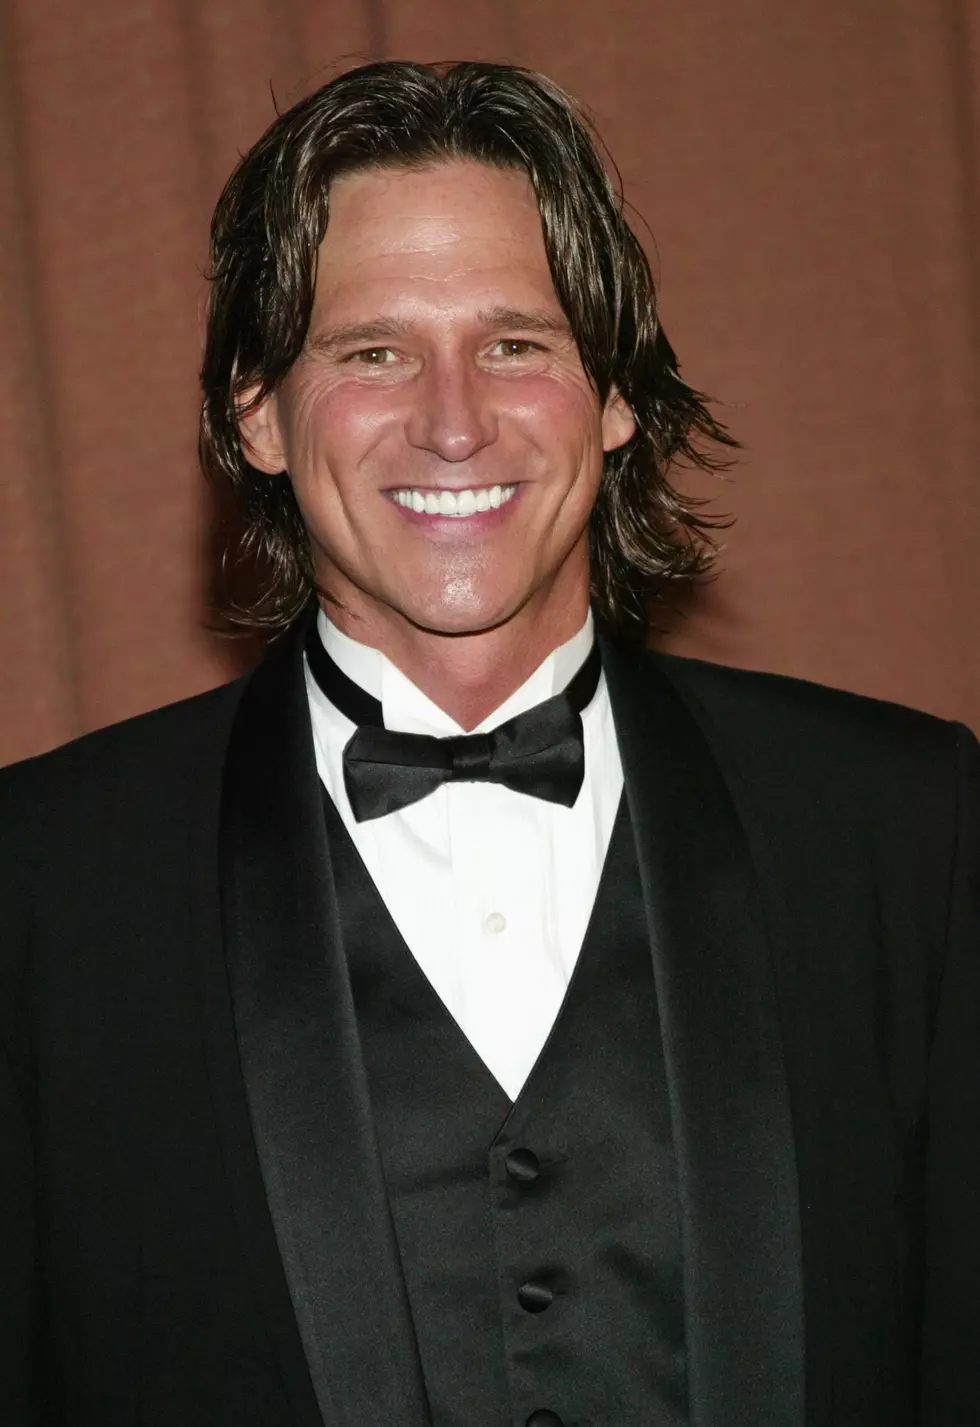 What Happened Today?: Billy Dean married in Nashville